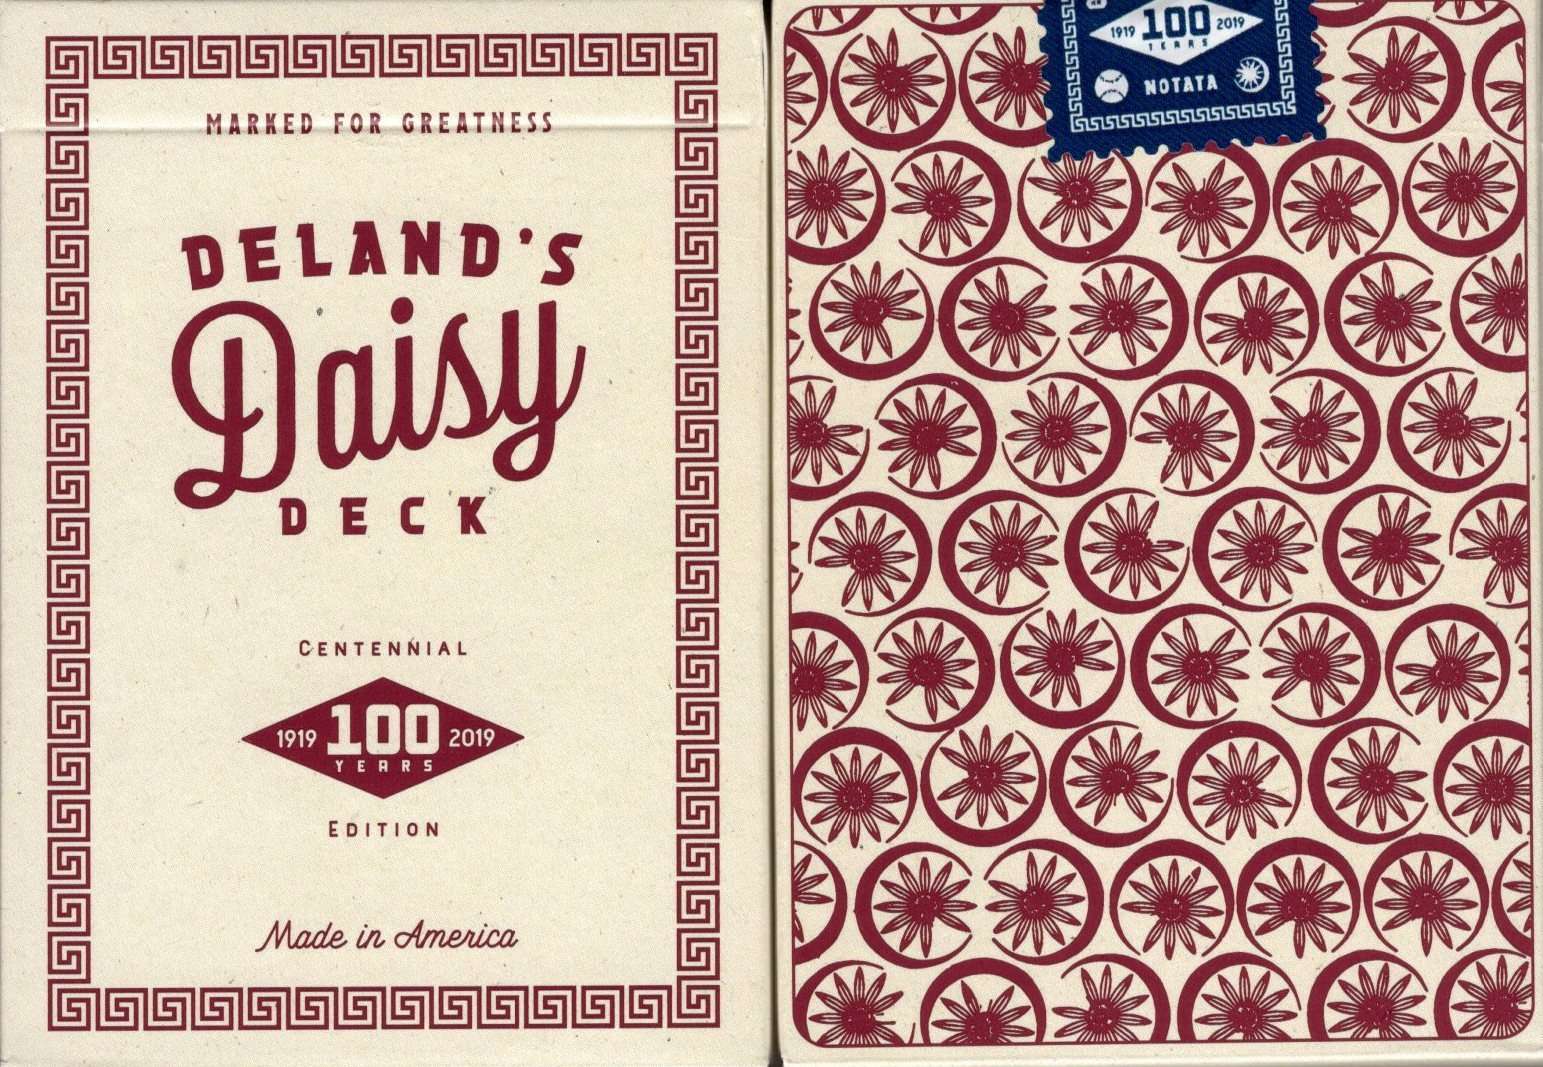 PlayingCardDecks.com-DeLand's Centennial Marked Playing Cards USPCC: Daisy Red